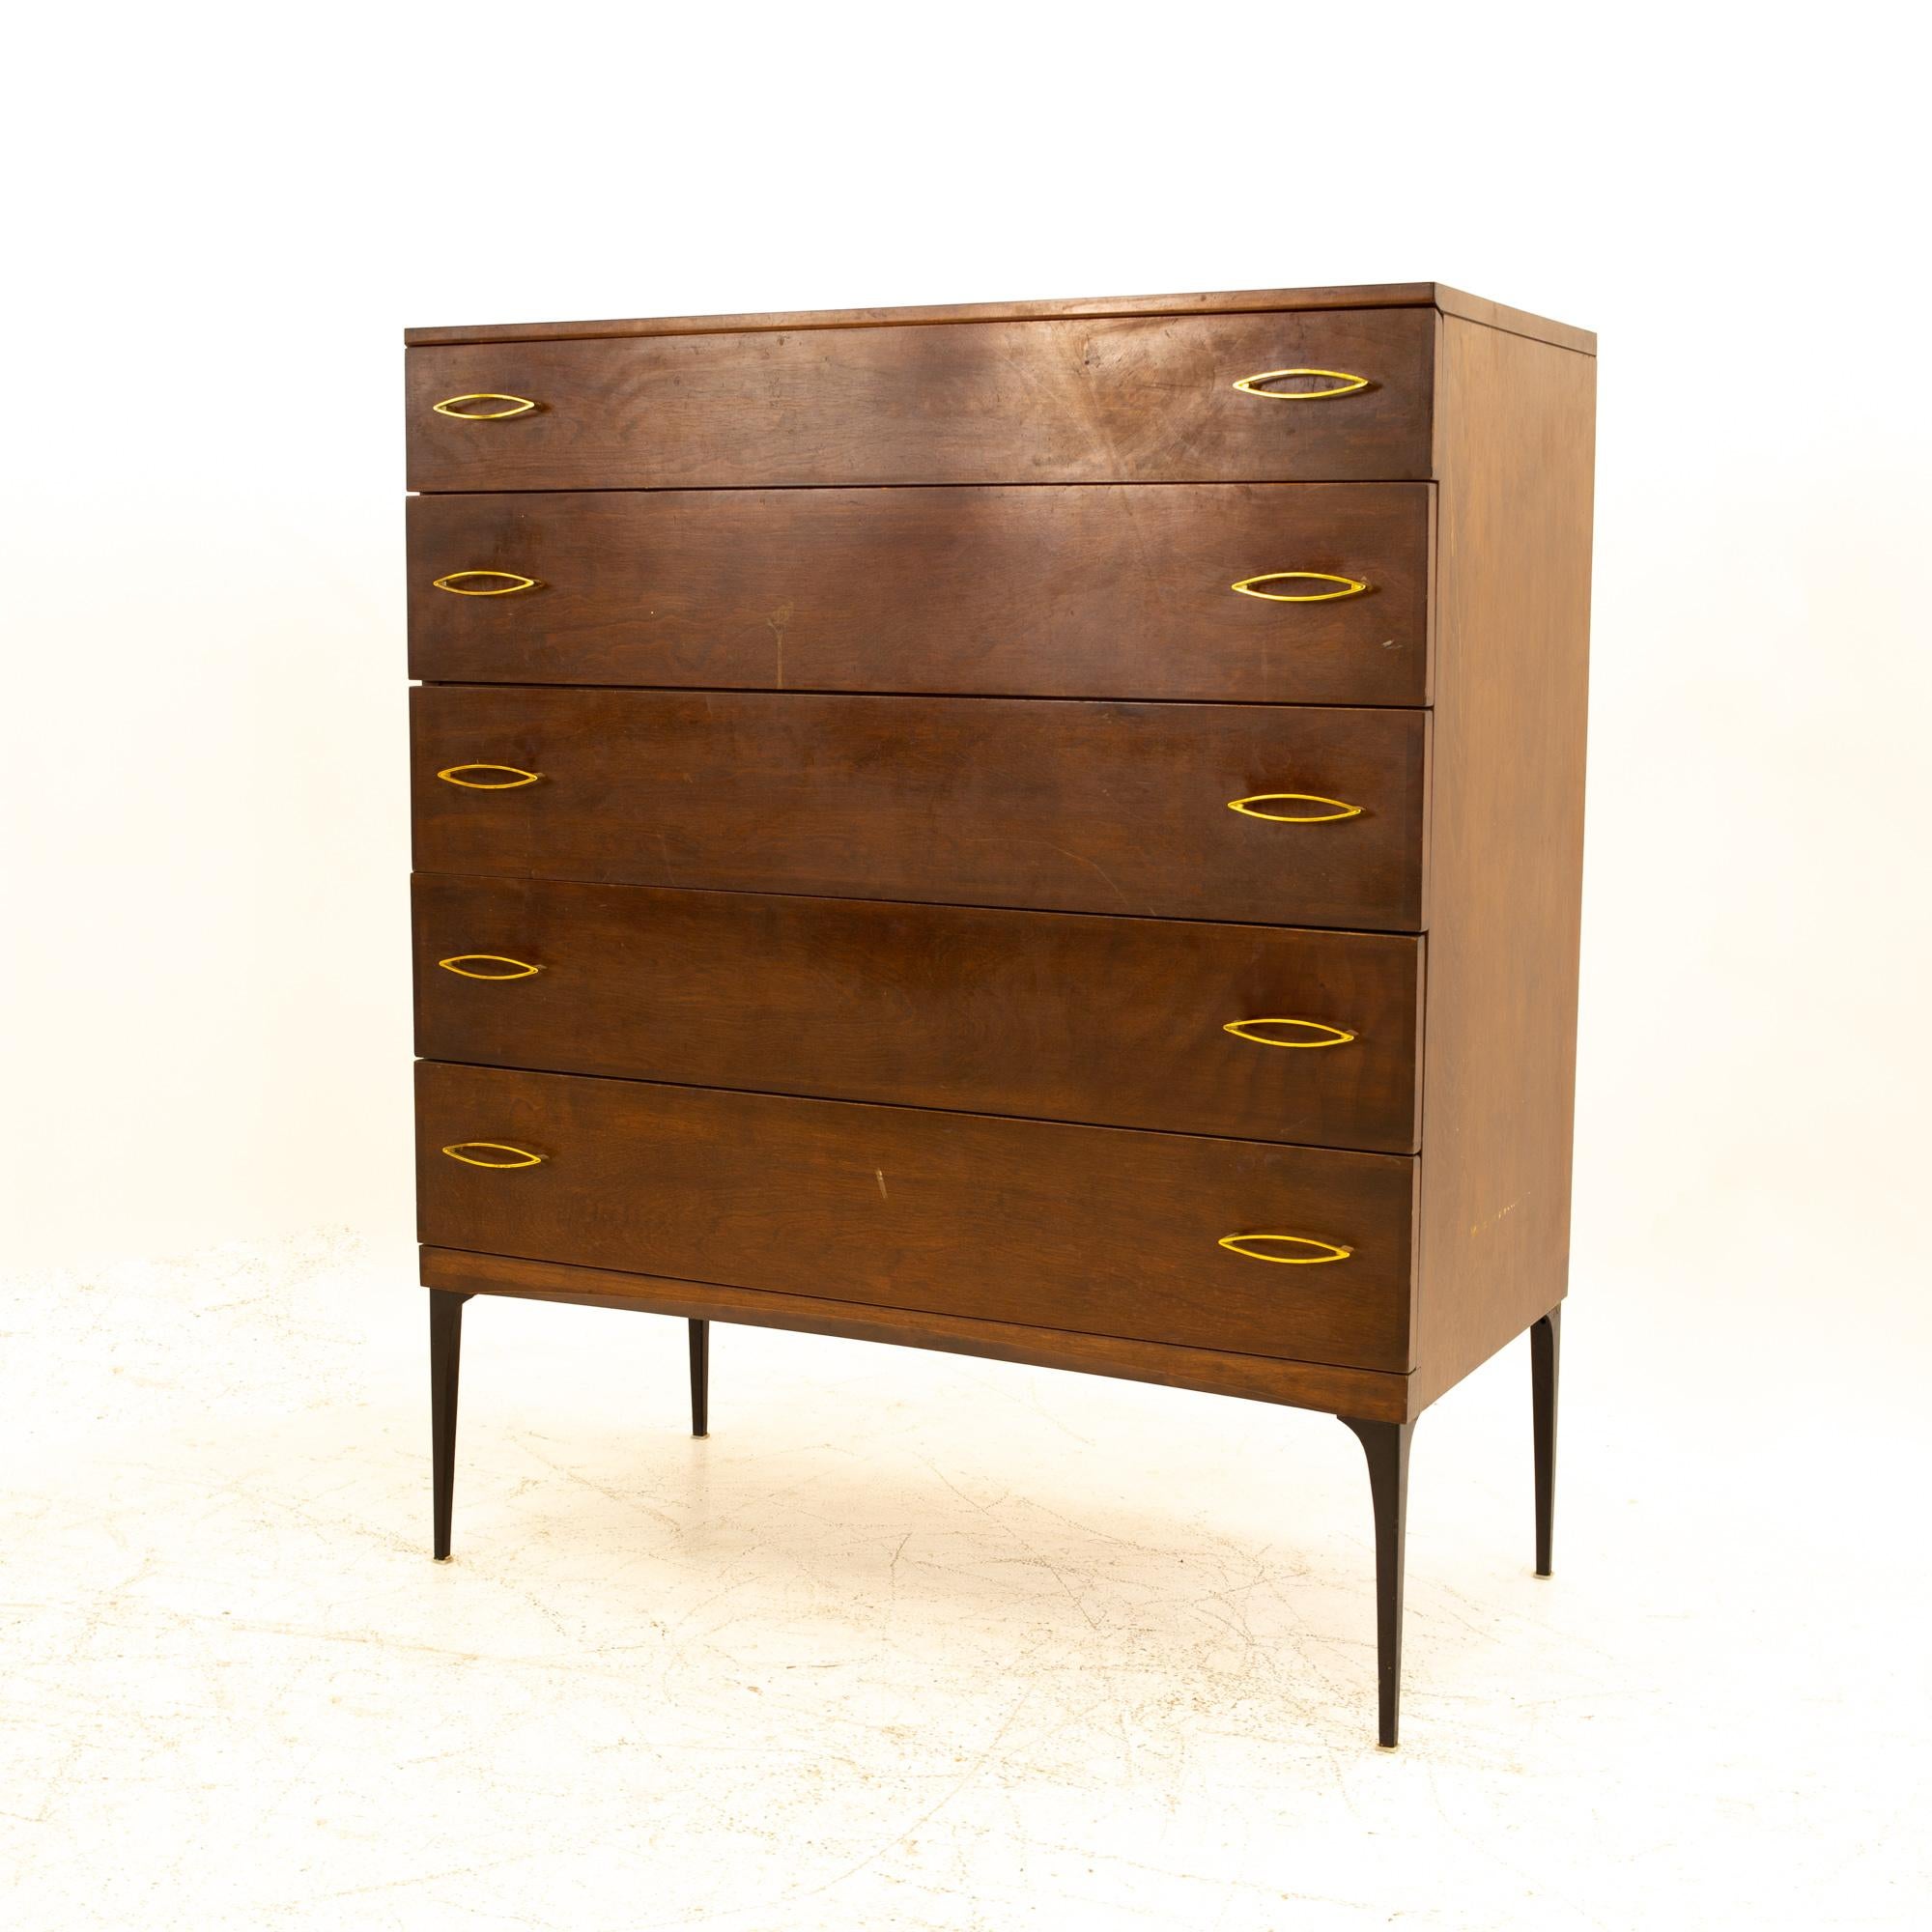 Heywood-Wakefield Contessa mid century walnut formica and brass cats eye highboy dresser
Dresser measures: 36 wide x 18 deep x 43.5 high

All pieces of furniture can be had in what we call restored vintage condition. That means the piece is